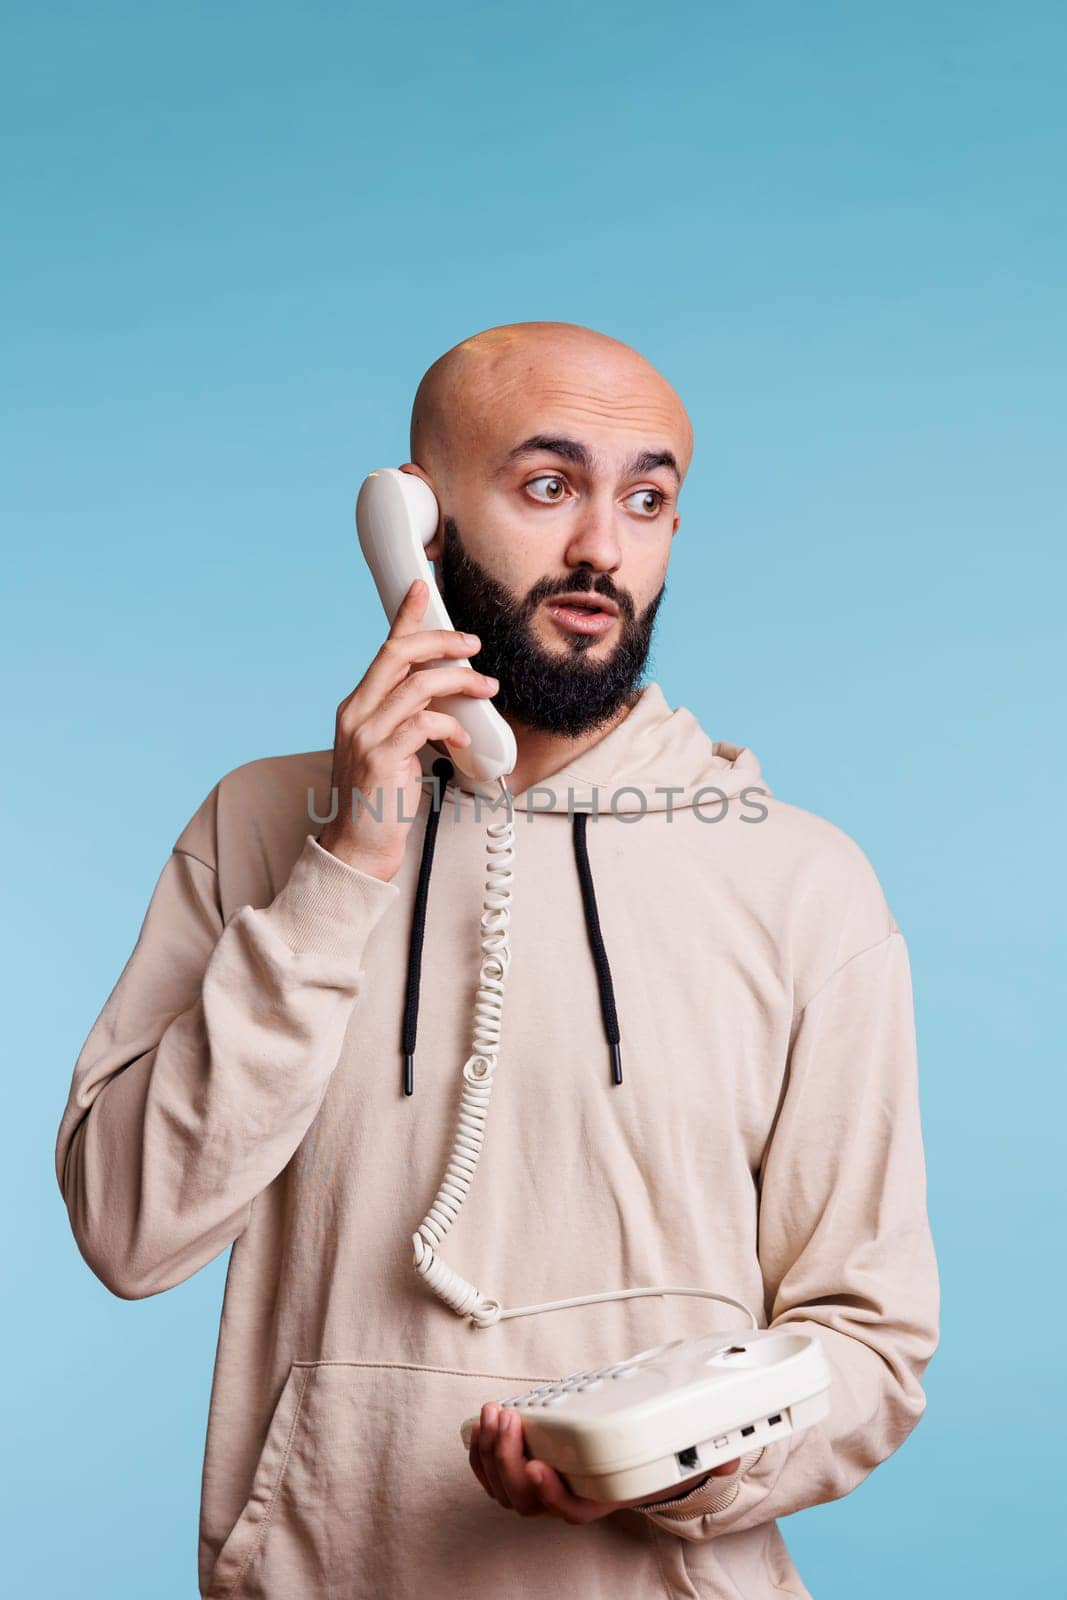 Arab man answering landline phone call and looking away with surprised expression. Young person talking on old fashioned corded telephone, having conversation, listening to interlocutor